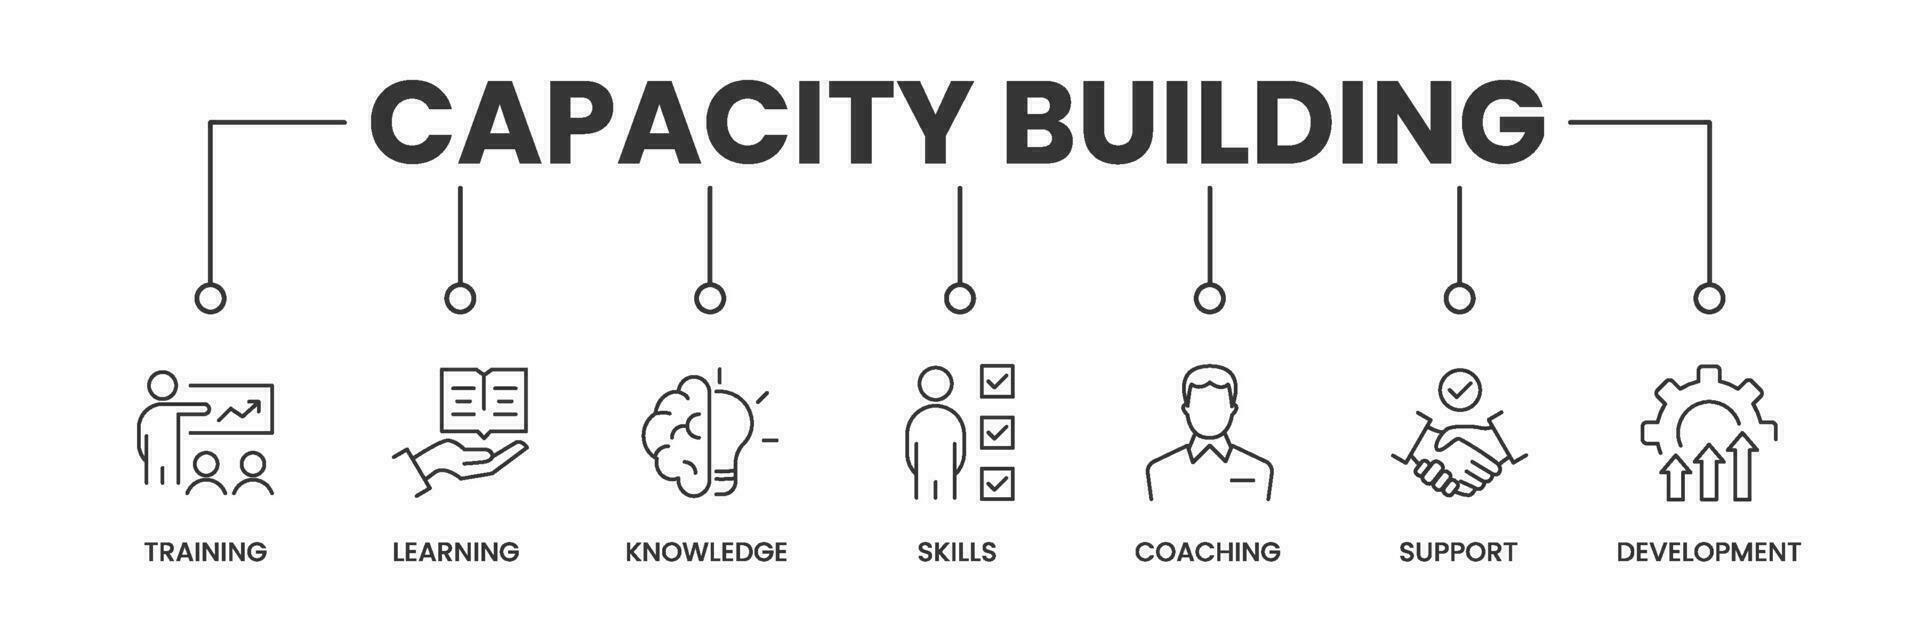 Capacity Building banner with icons. Outline icons of Training, Learning, Knowledge, Skills, Coaching, Support, and Improvement. Vector Illustration.